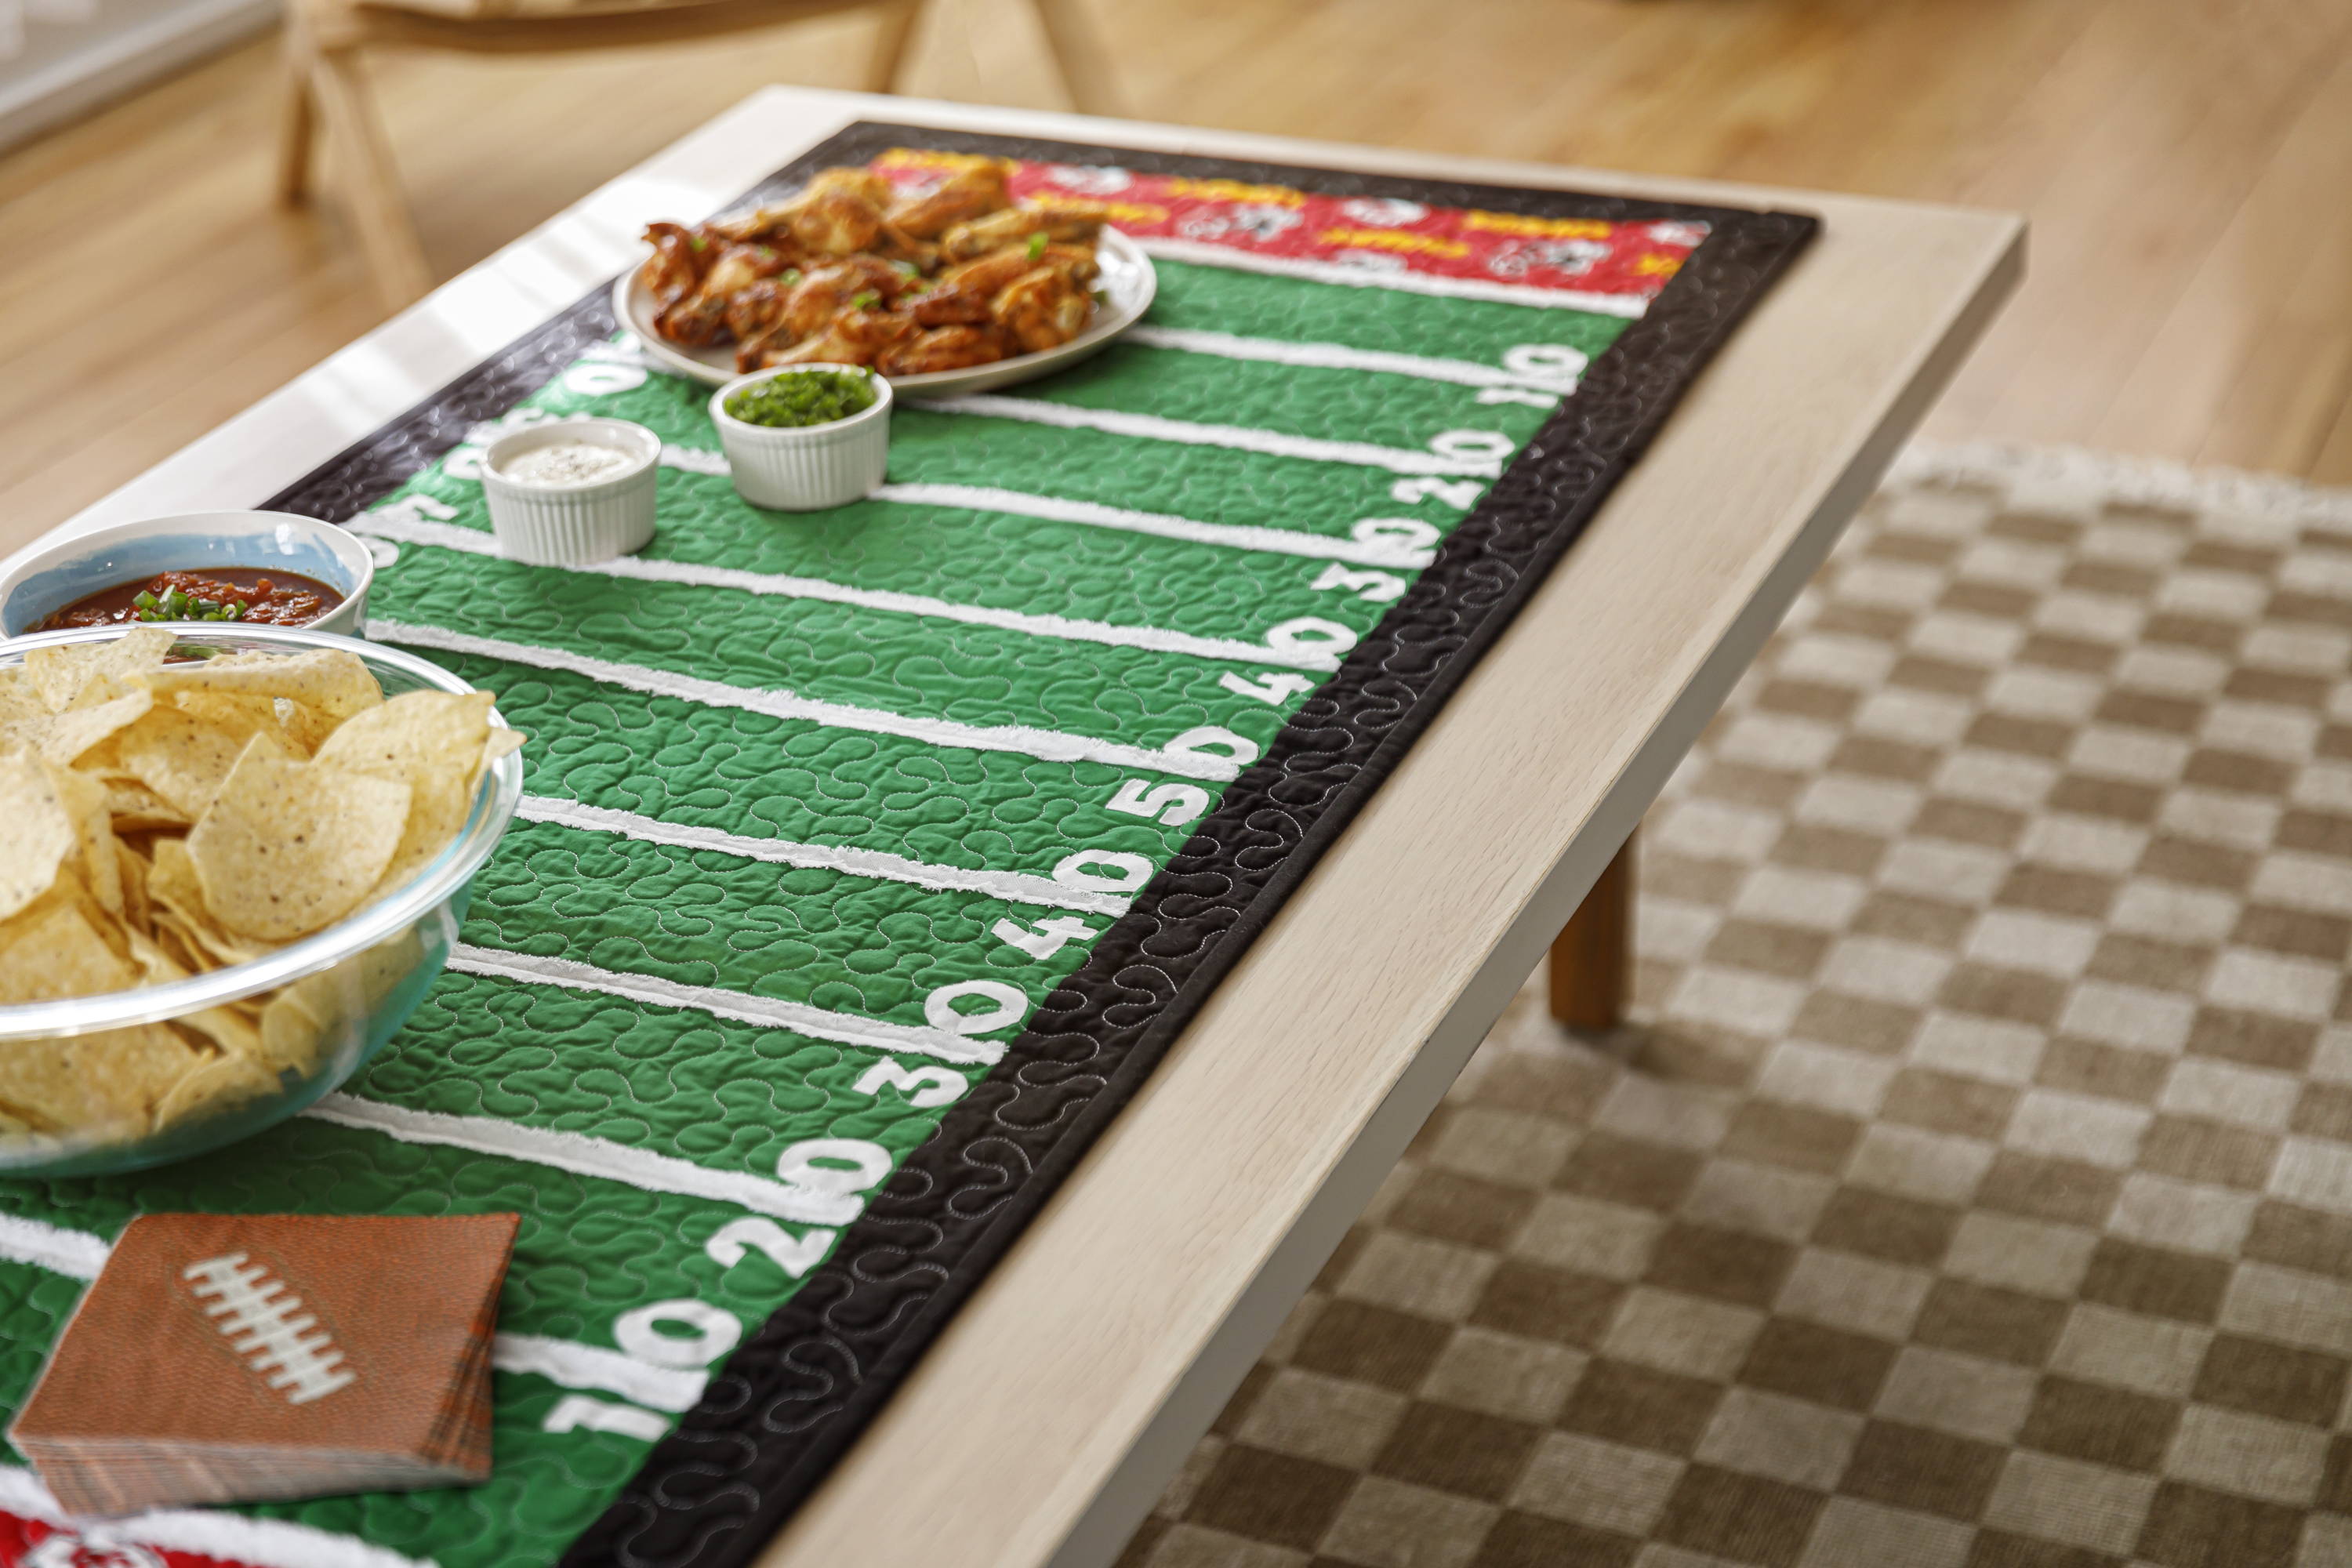 End zone table runner sewing project for game day